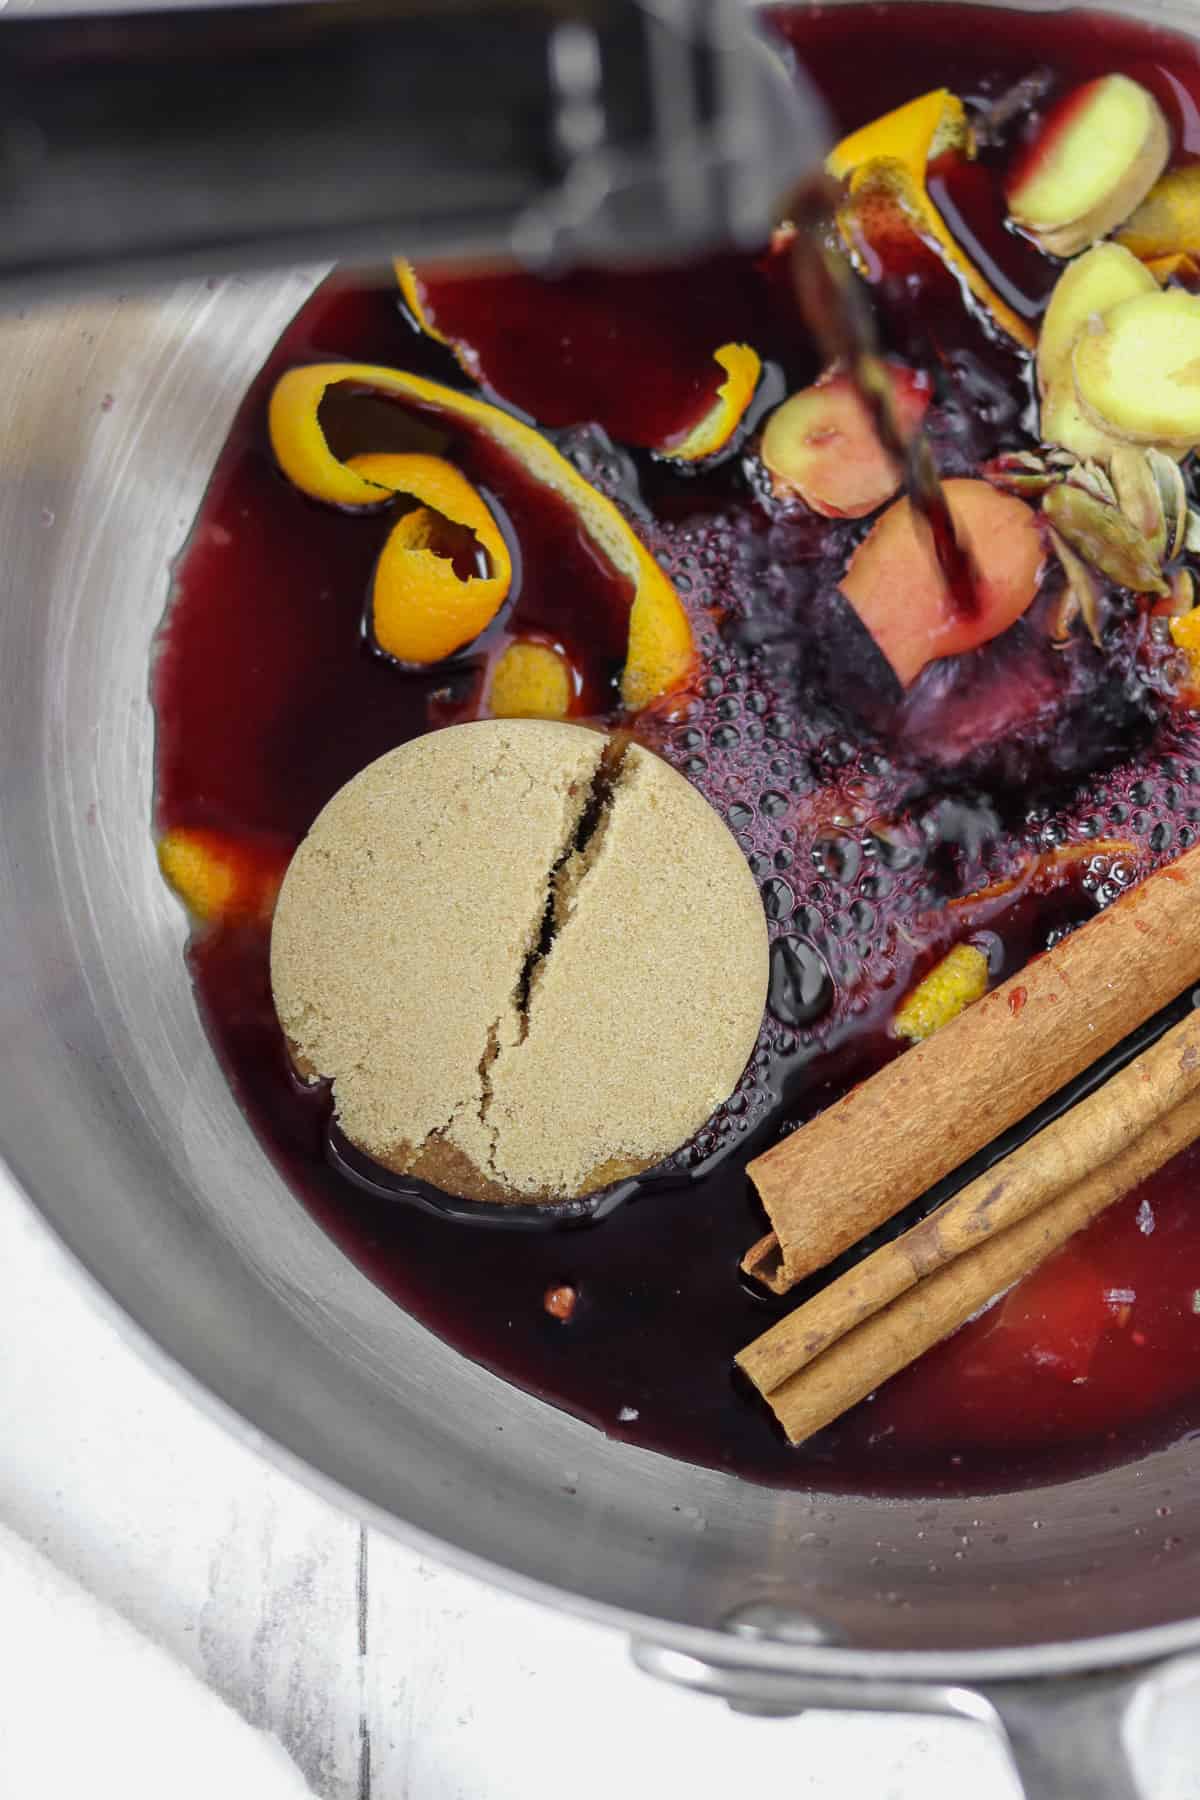 Someone pouring red wine into a pan with brown sugar, spices and orange.